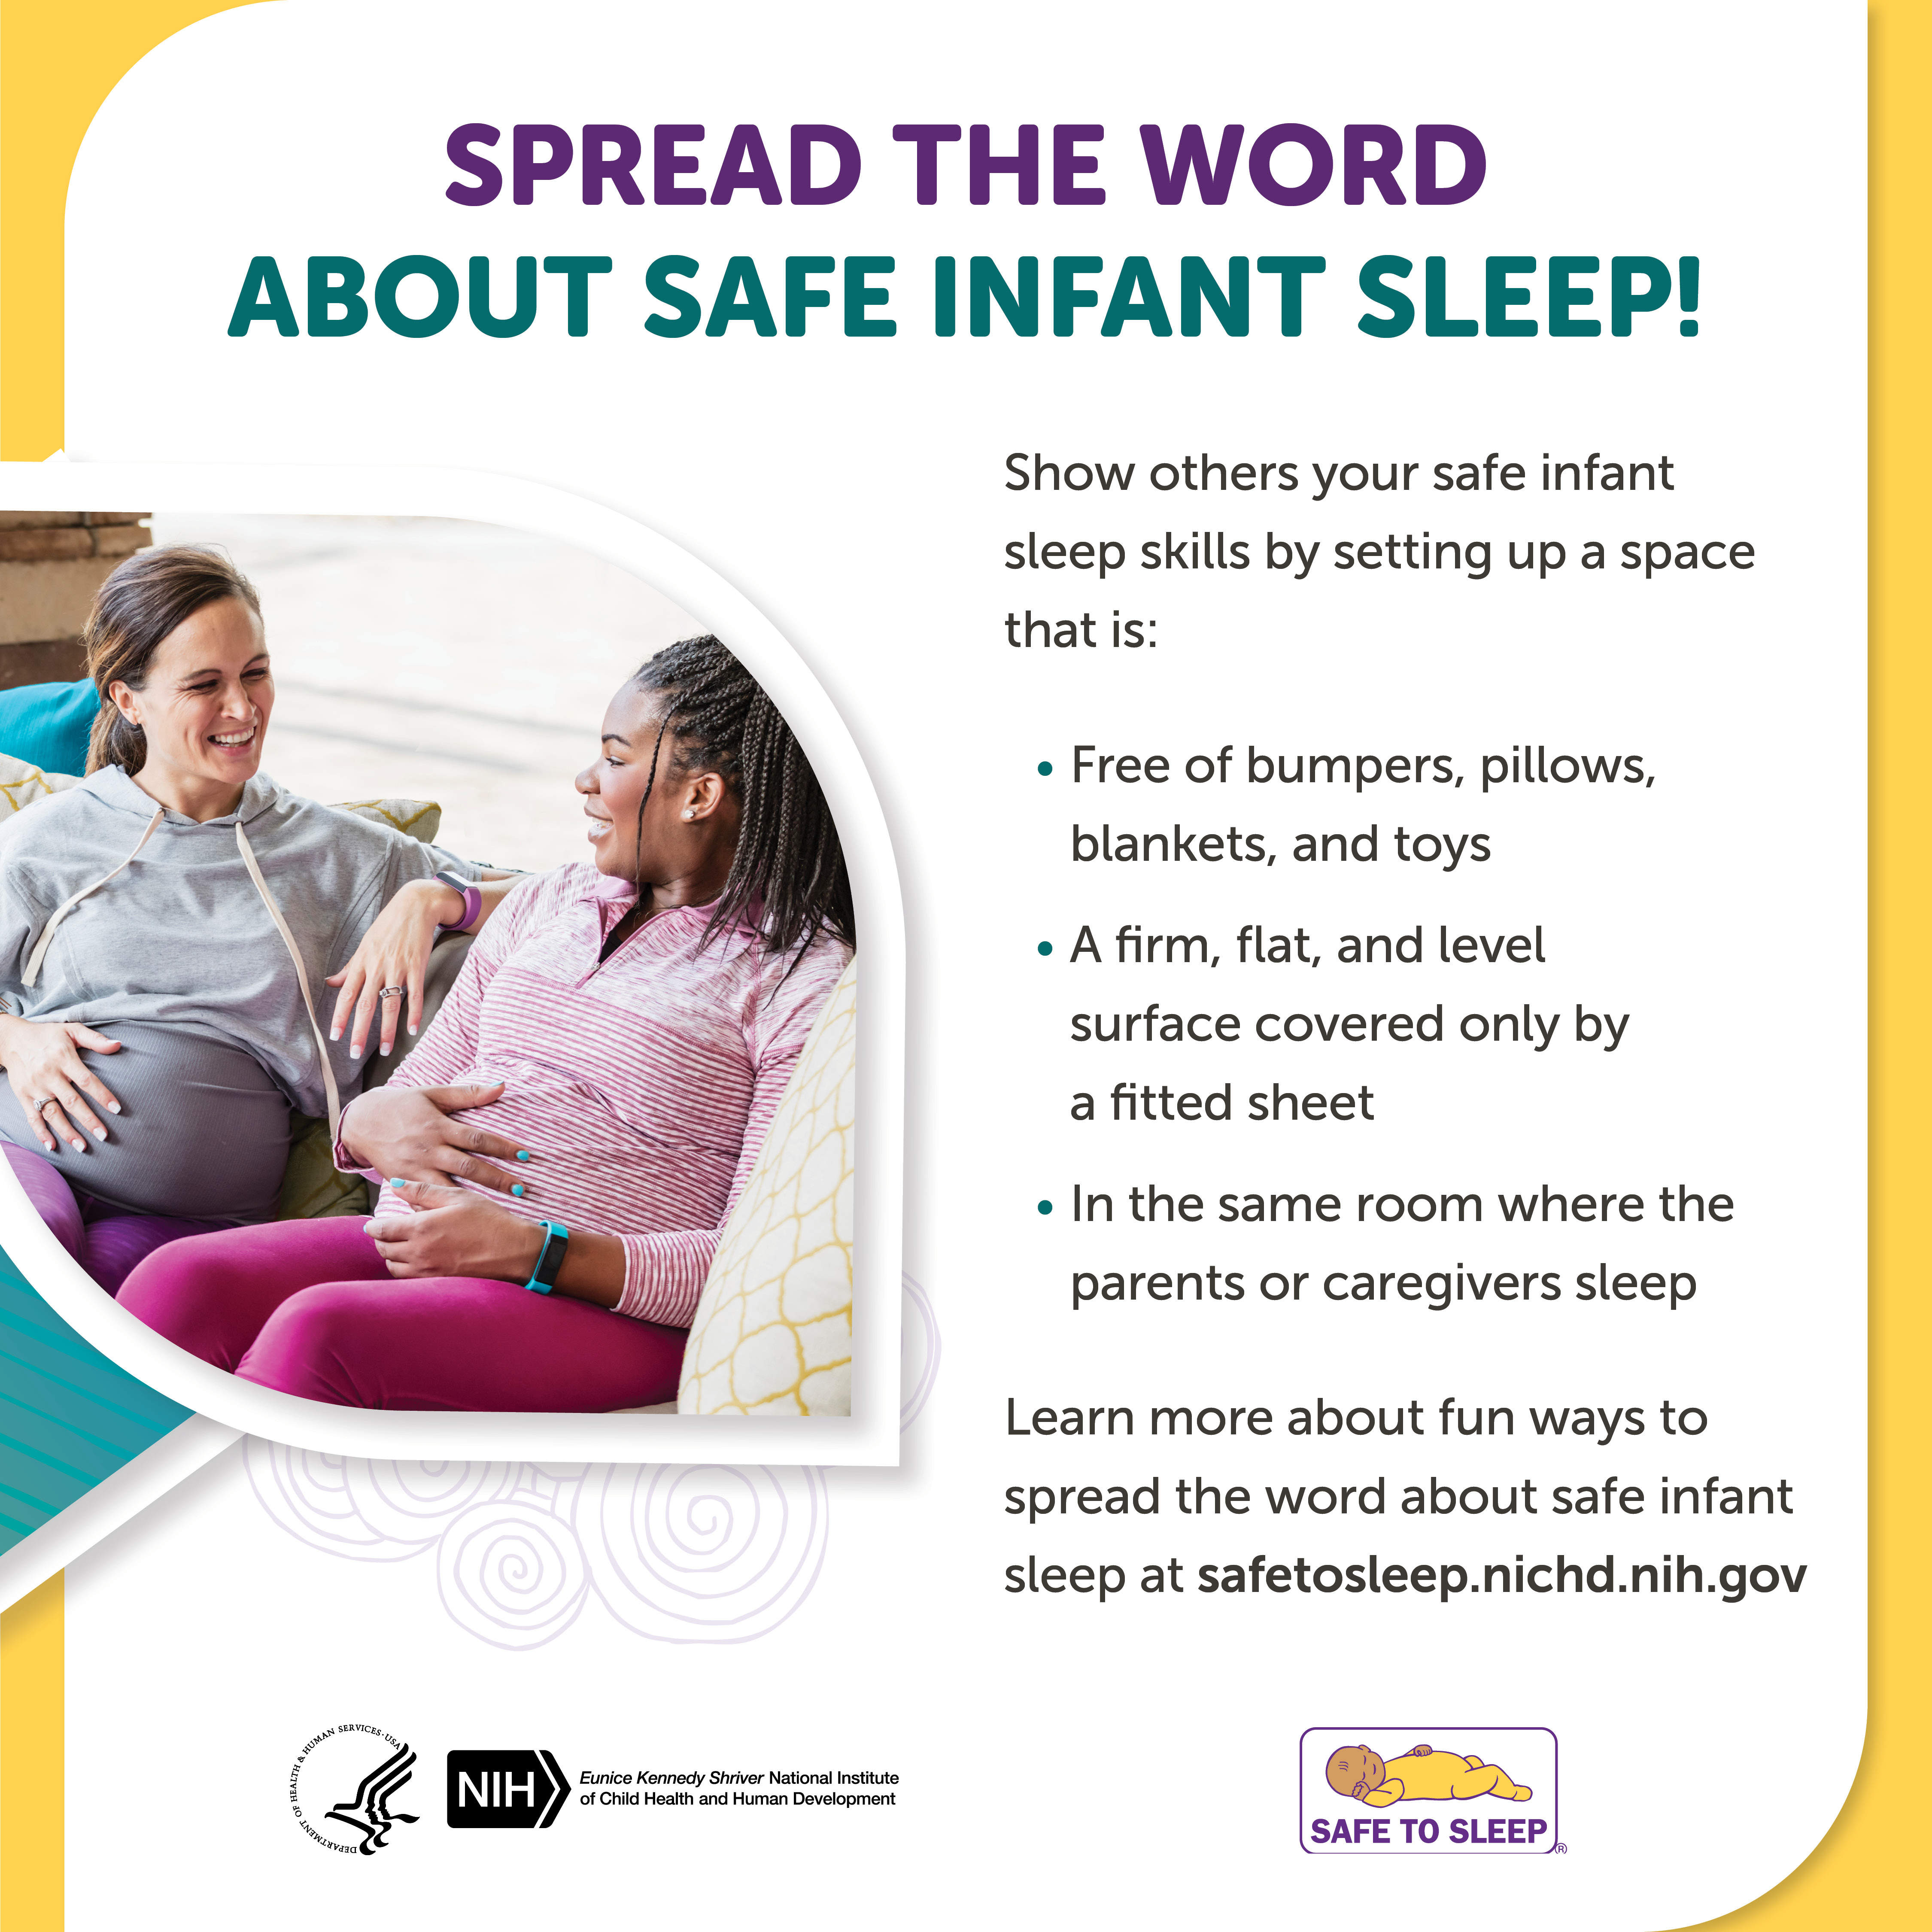 Image of two pregnant women sitting on a couch together talking. Spread the word about safe infant sleep! Show others your safe infant sleep skills by setting up a space that is: Free of bumpers, pillows, blankets, and toys. A firm, flat, and level surface covered only by a fitted sheet. In the same room where the parents or caregivers sleep. Learn more about fun ways to spread the word about safe infant sleep at safetosleep.nichd.nih.gov. Seal of the U.S. Department of Health and Human Services. Logo of the Eunice Kennedy Shriver National Institute of Child Health and Human Development. Safe to Sleep logo.